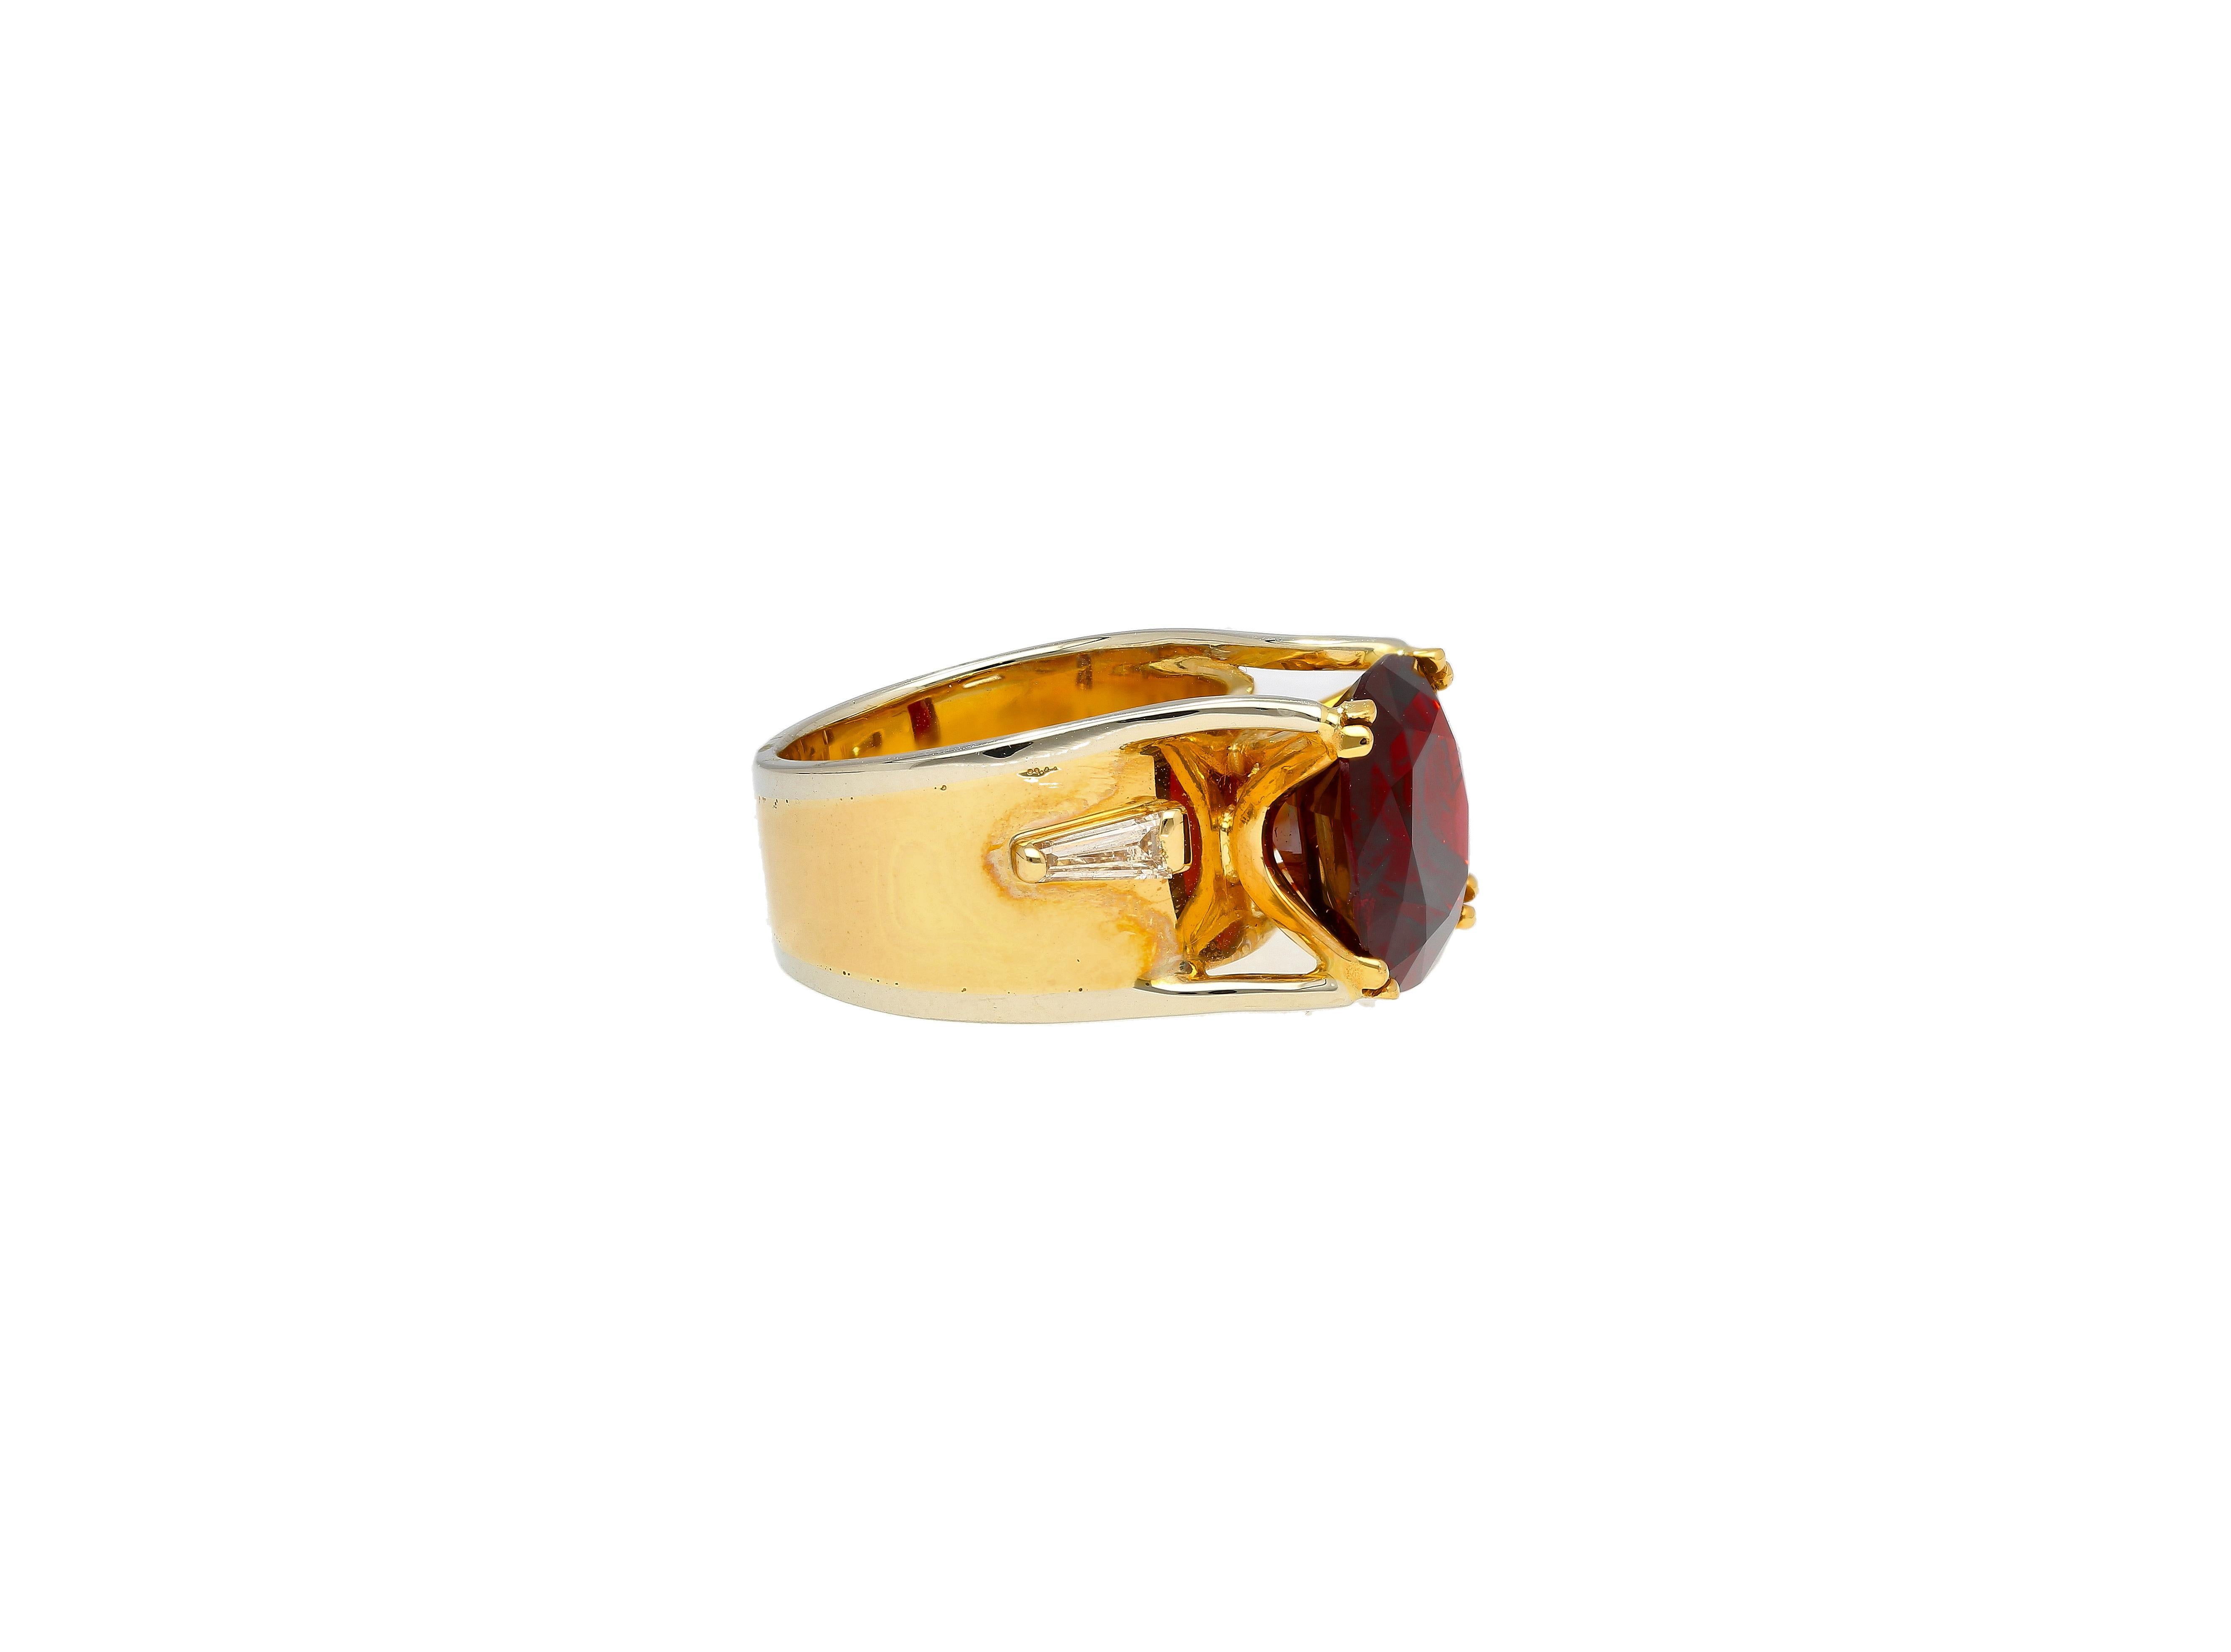 Contemporary 6.04 Carat Cushion Cut No Heat Burma Origin Spinel in Vintage 14K Gold Ring For Sale